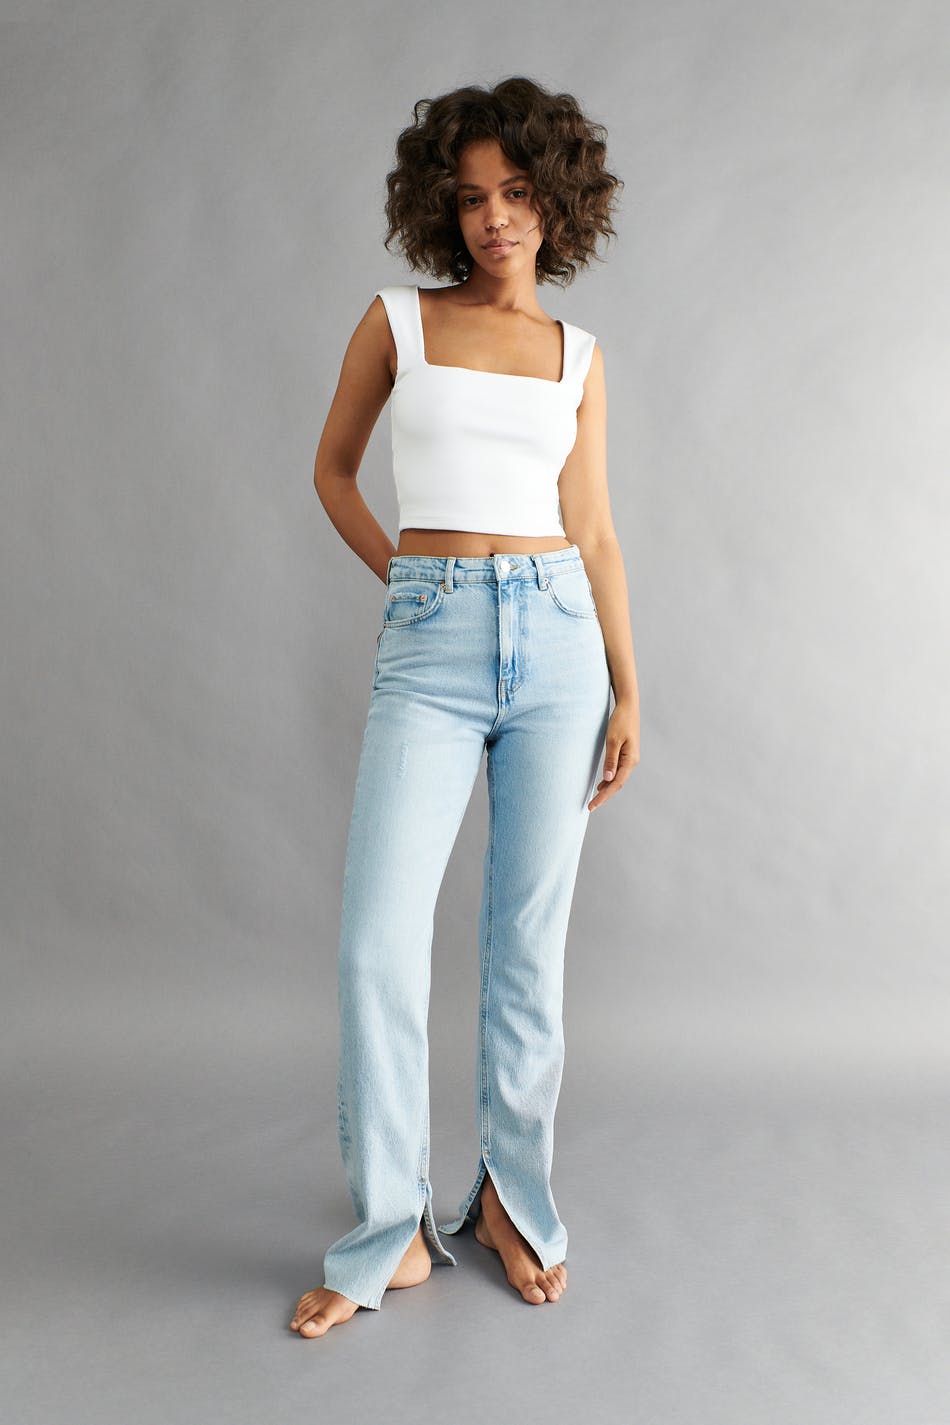 High slit jeans - Gina Tricot